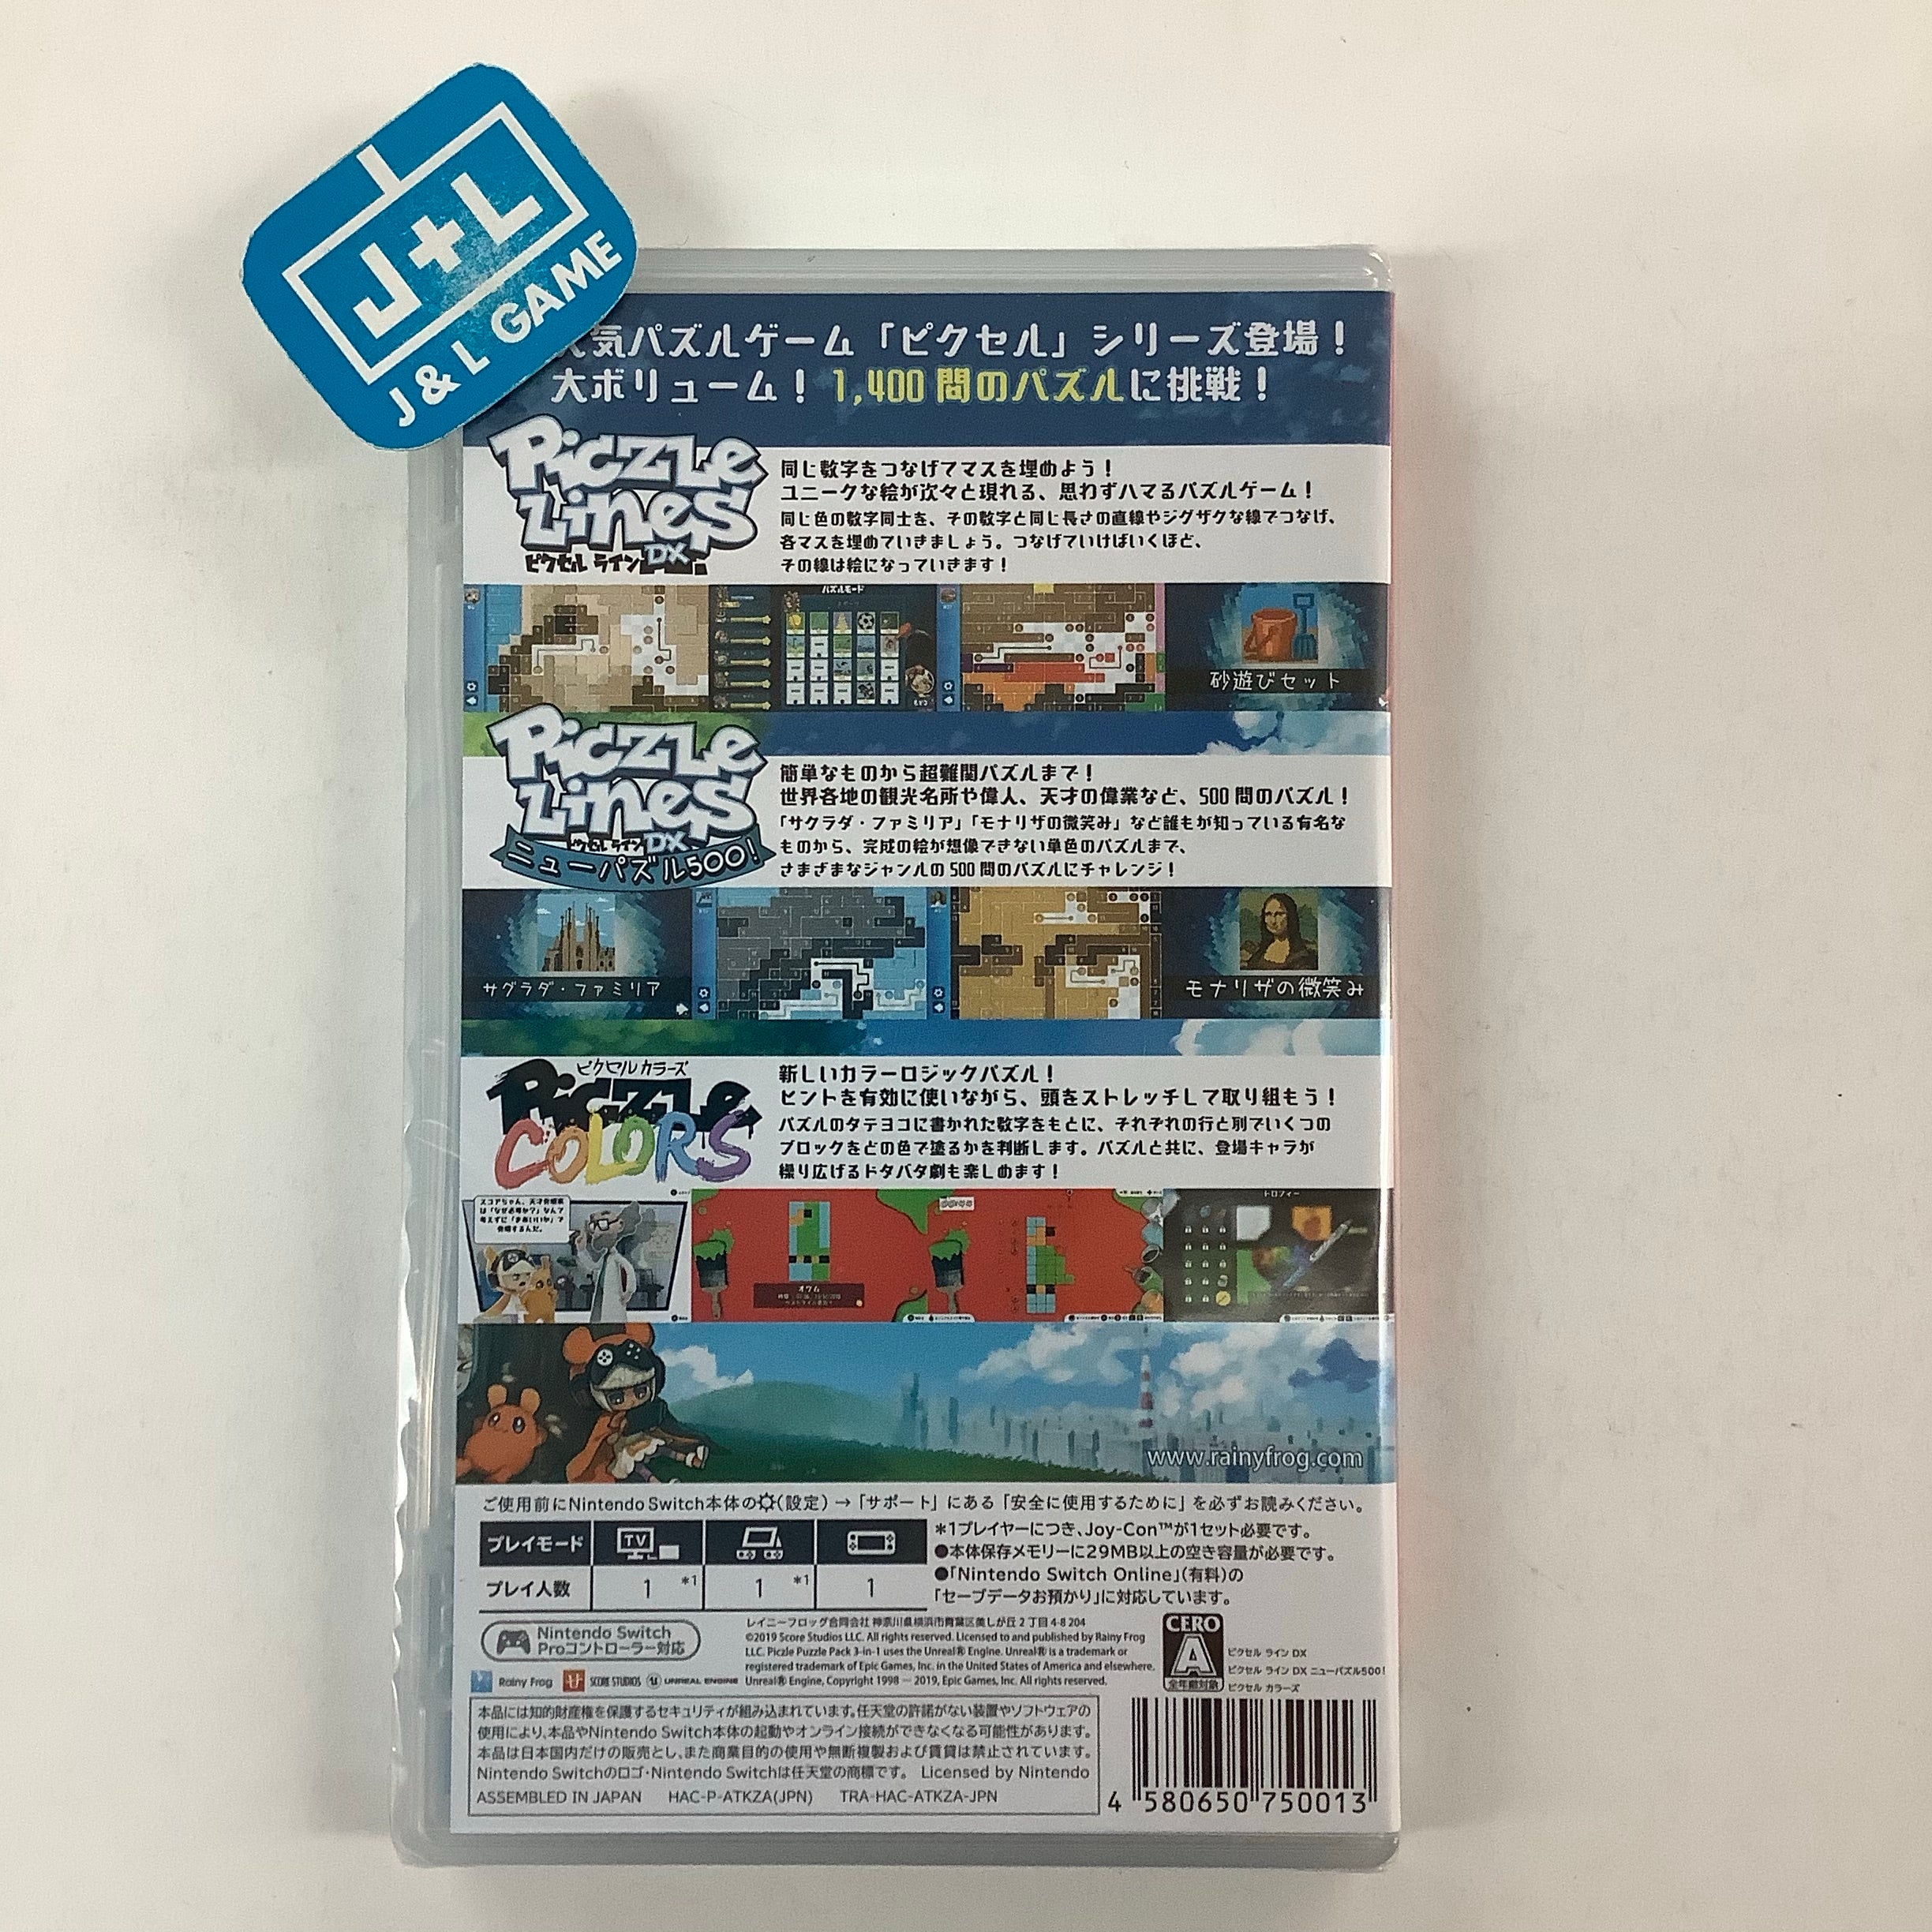 Piczle Puzzle Pack 3-in-1 - (NSW) Nintendo Switch (Japanese Import) Video Games Rainy Frog   